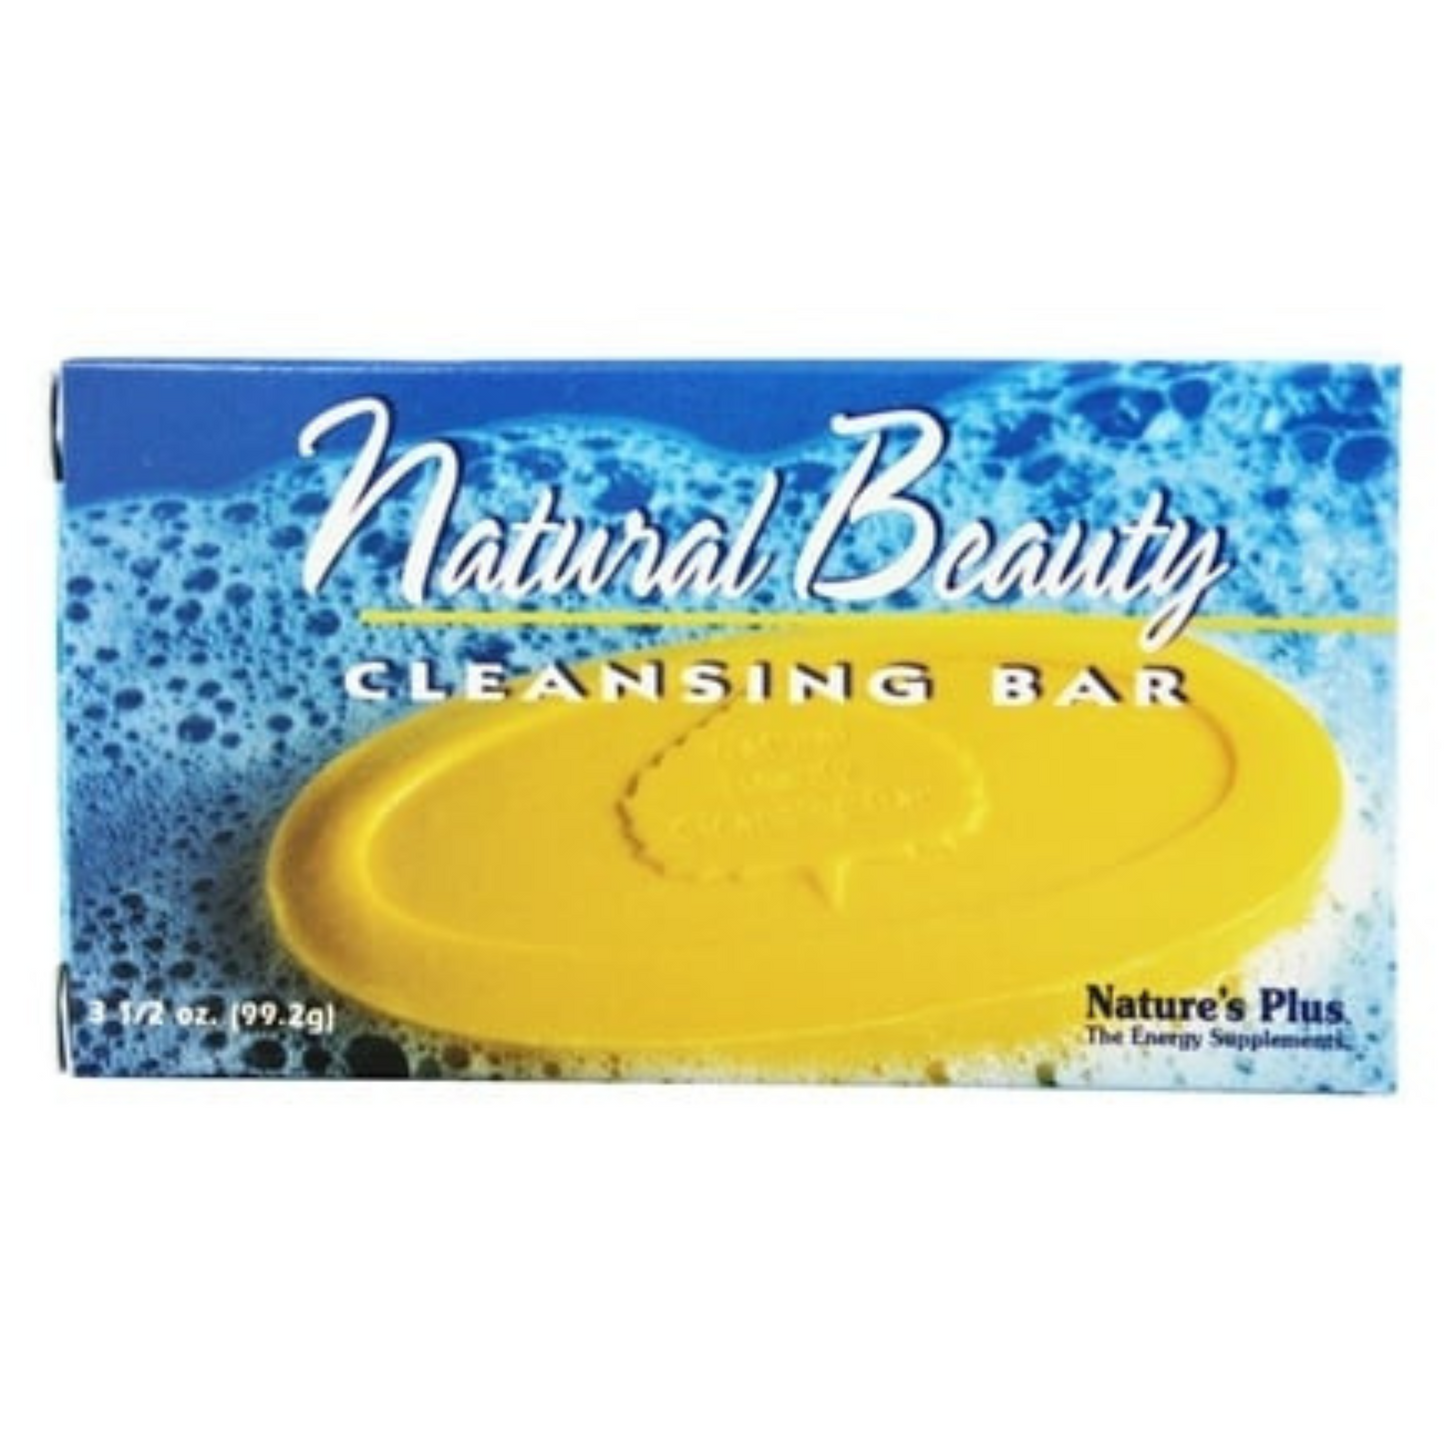 Primary image of Beauty Cleansing Bar